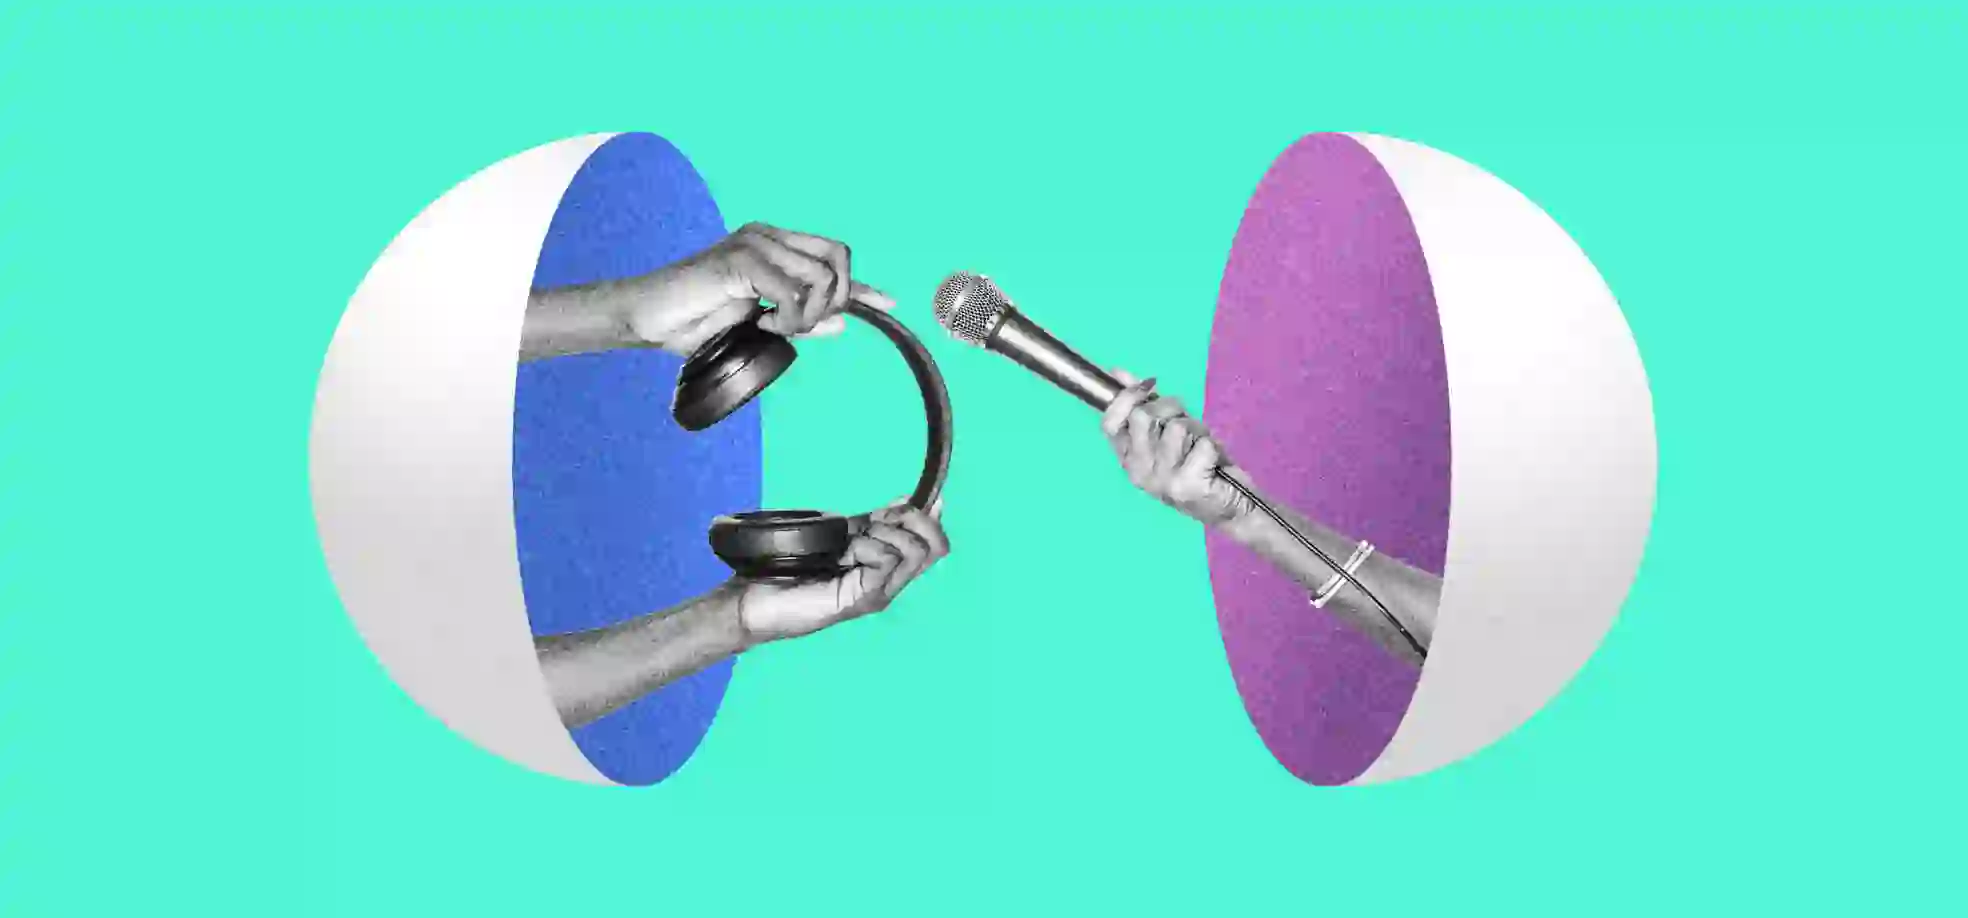 Hands with audio devices from half spheres illustration